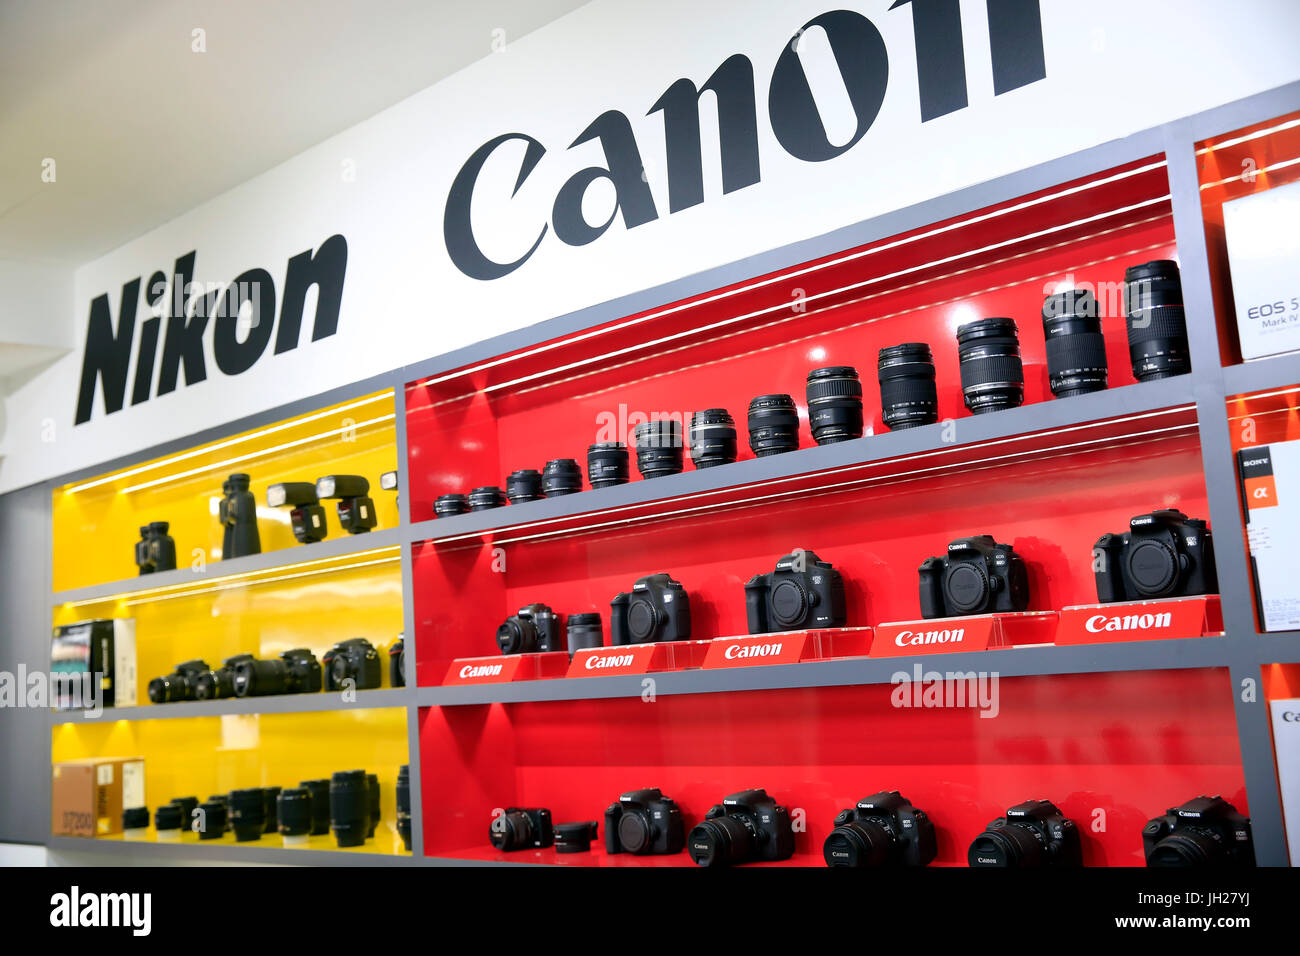 Canon and Nikon cameras for sale In shop.  Singapore. Stock Photo